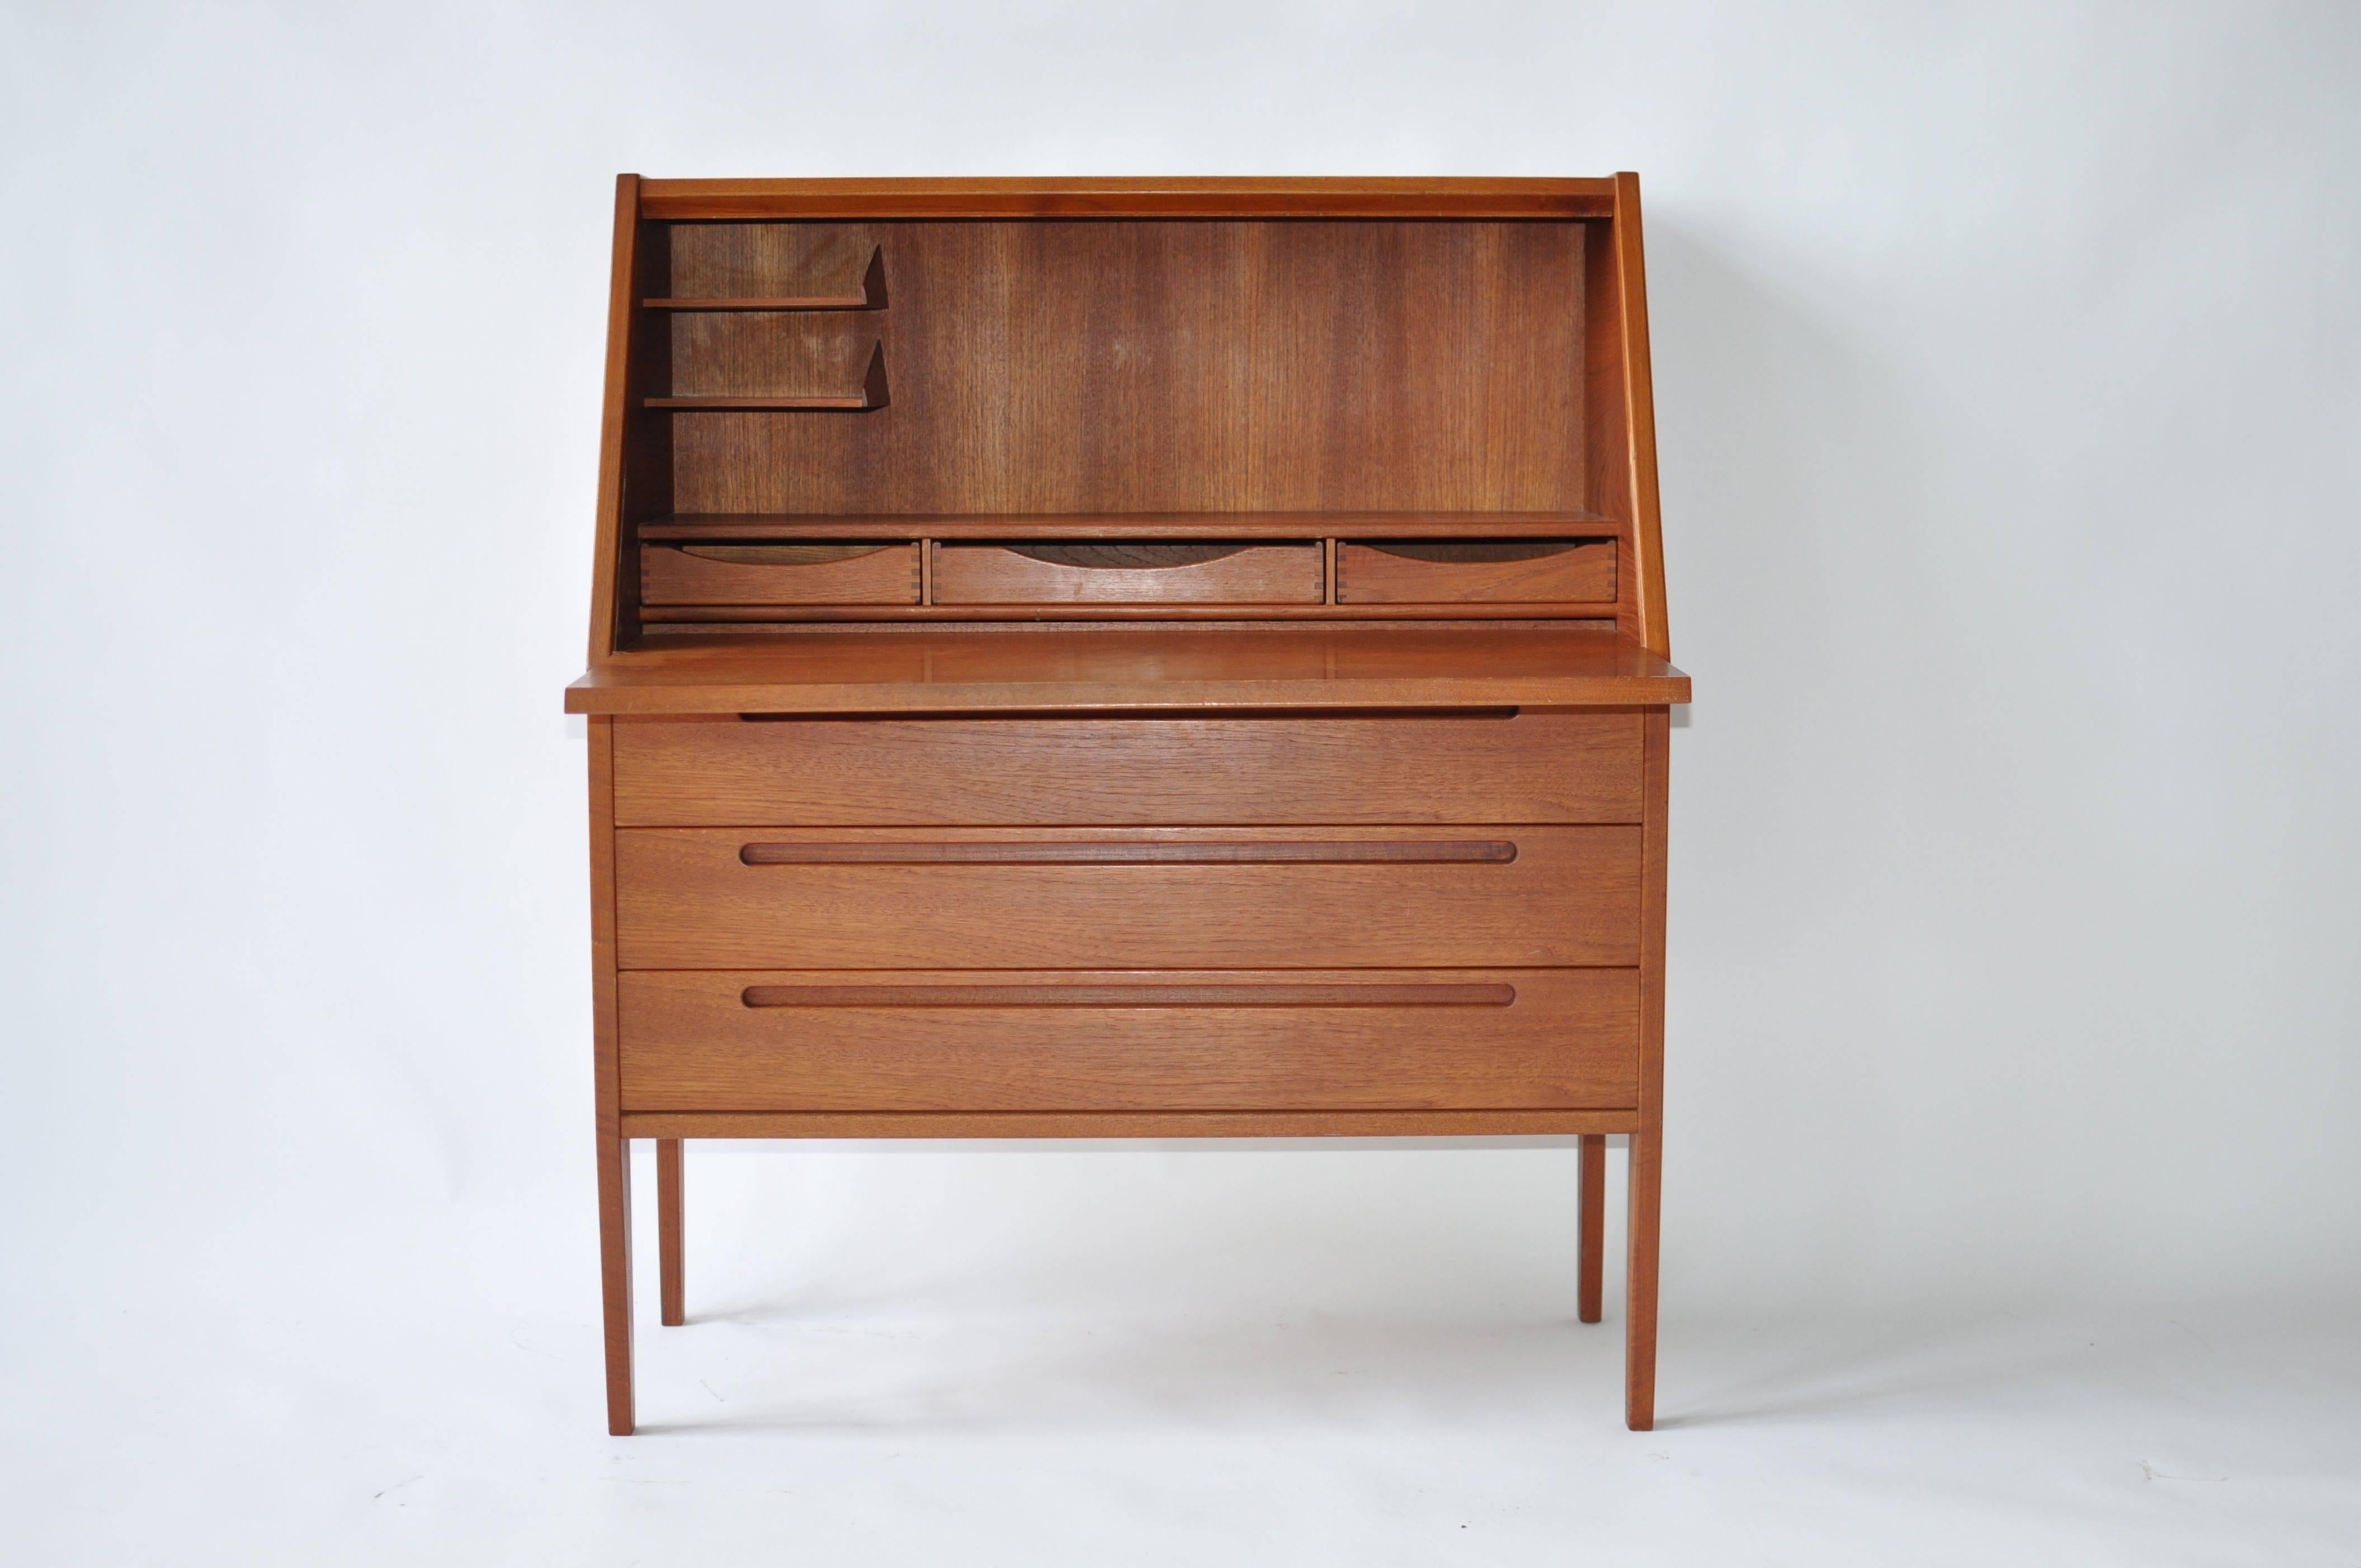 Danish drop front desk with three drawers. Beautifully crafted. Chair not included and sold separately.